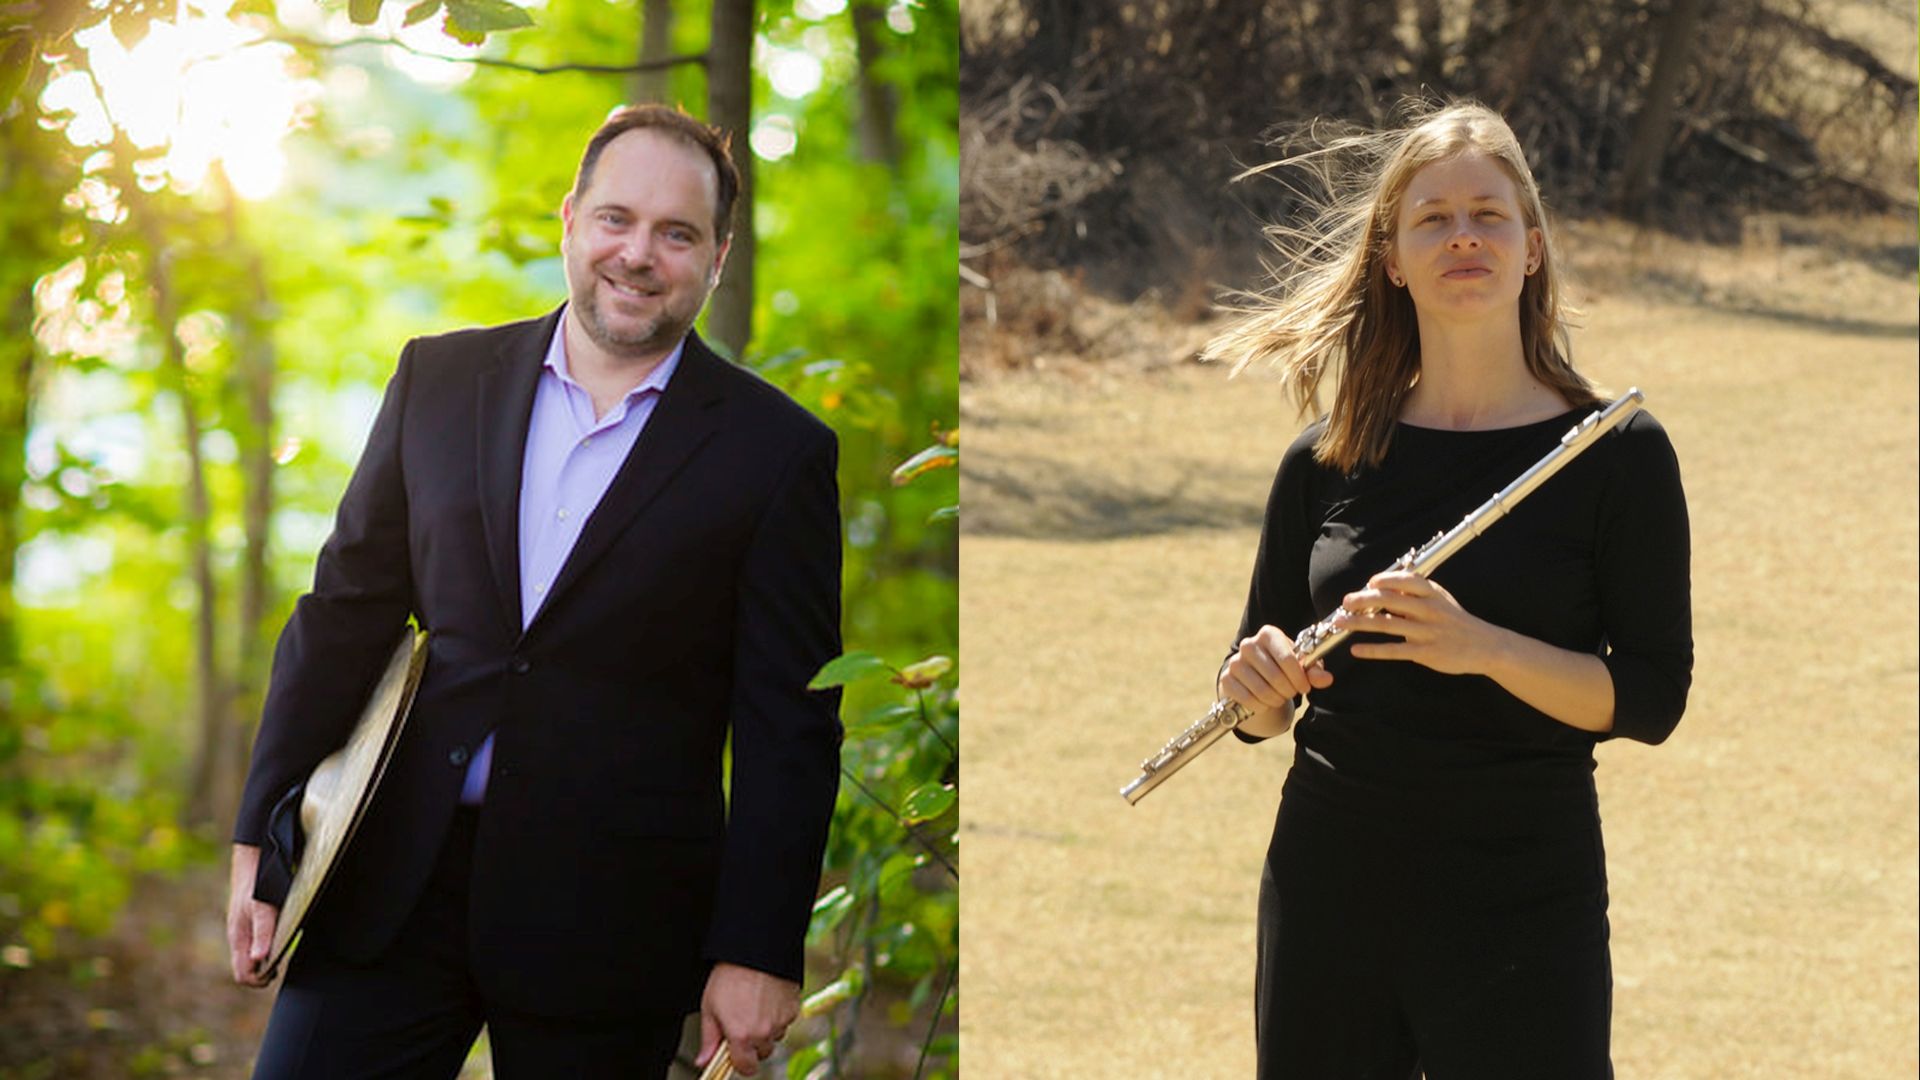 Percussionist John Kilkenny and flutist Carrie Rose will perform “Nature Sounds” at the Nov. 16 Origins Series concert.